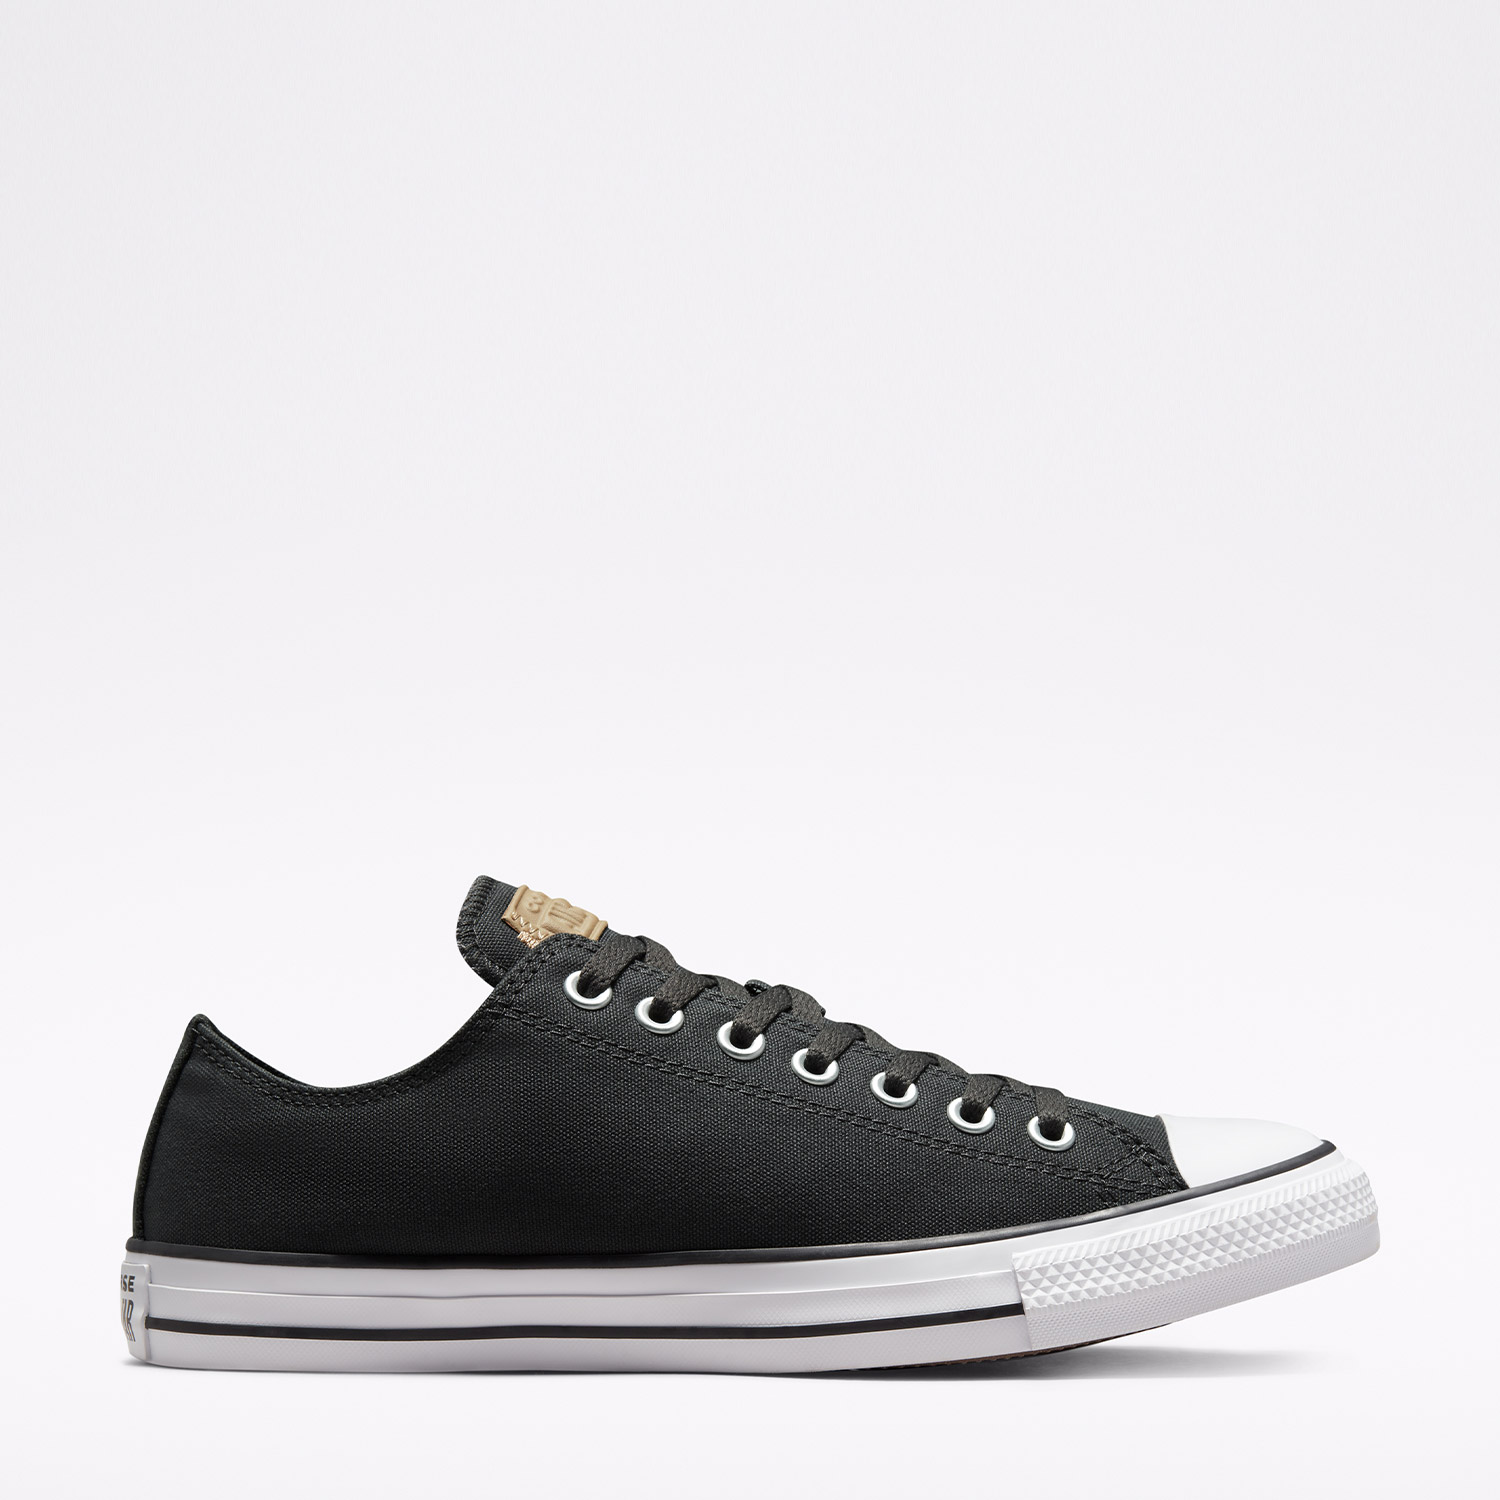  Chuck Taylor All Star Mixed Material Pop Stitch